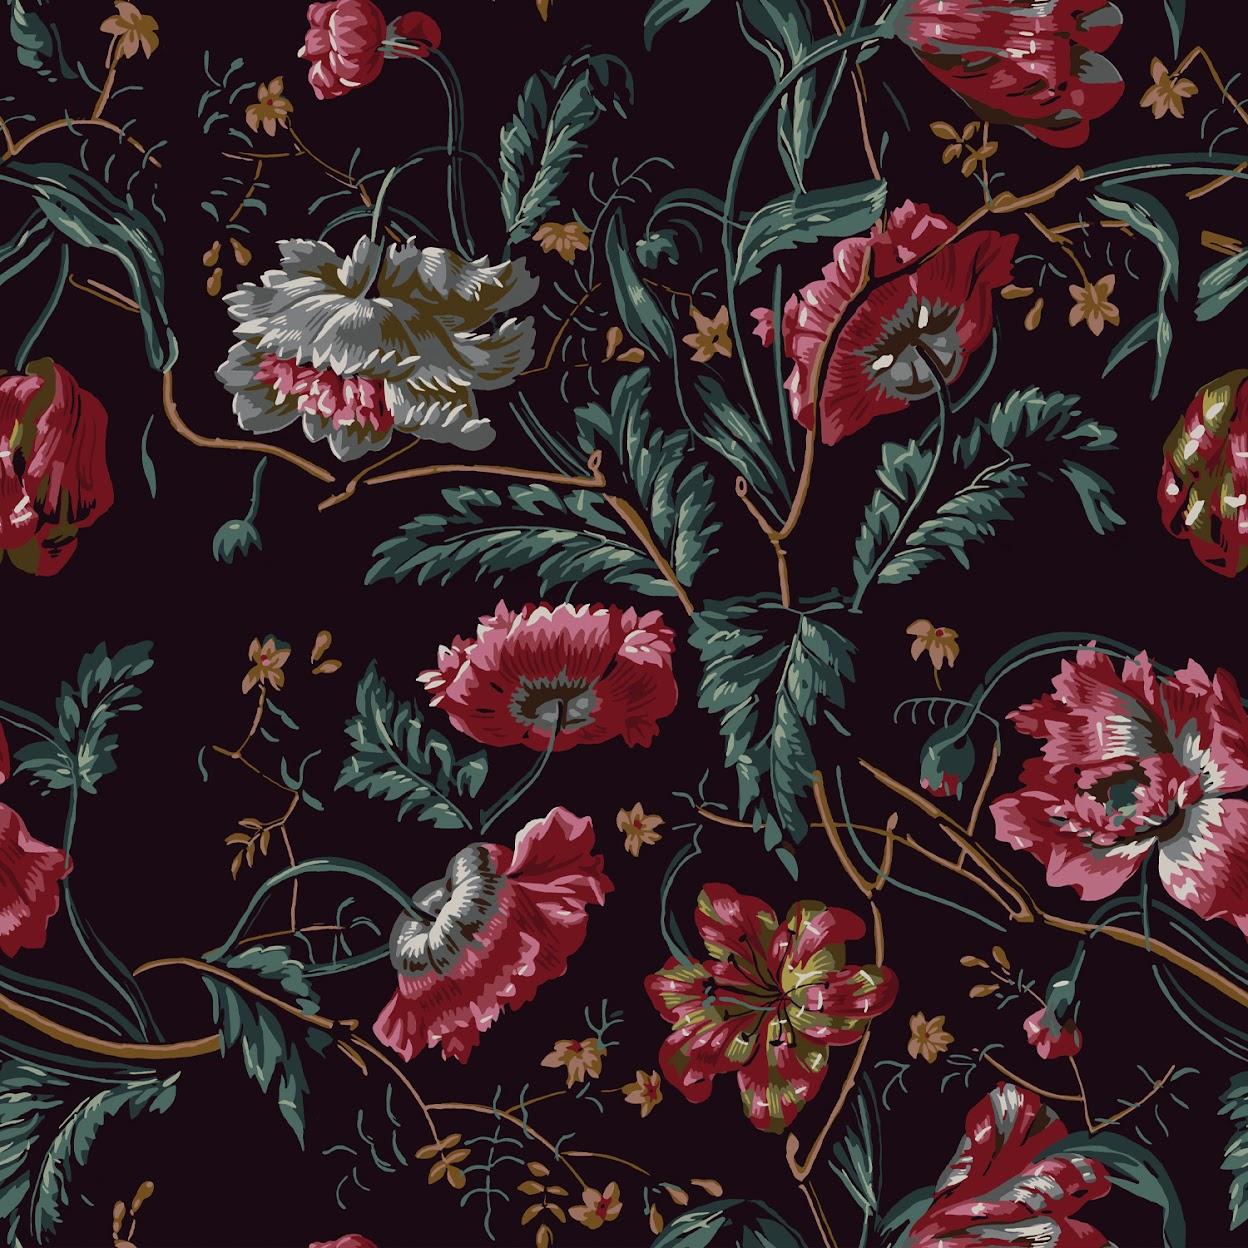 Repeat: 69,6 cm / 27.4 in

Founded in 2019, the French wallpaper brand Papier Francais is defined by the rediscovery, restoration, and revival of iconic wallpapers dating back to the French “Golden Age of wallpaper” of the 18th and 19th centuries.